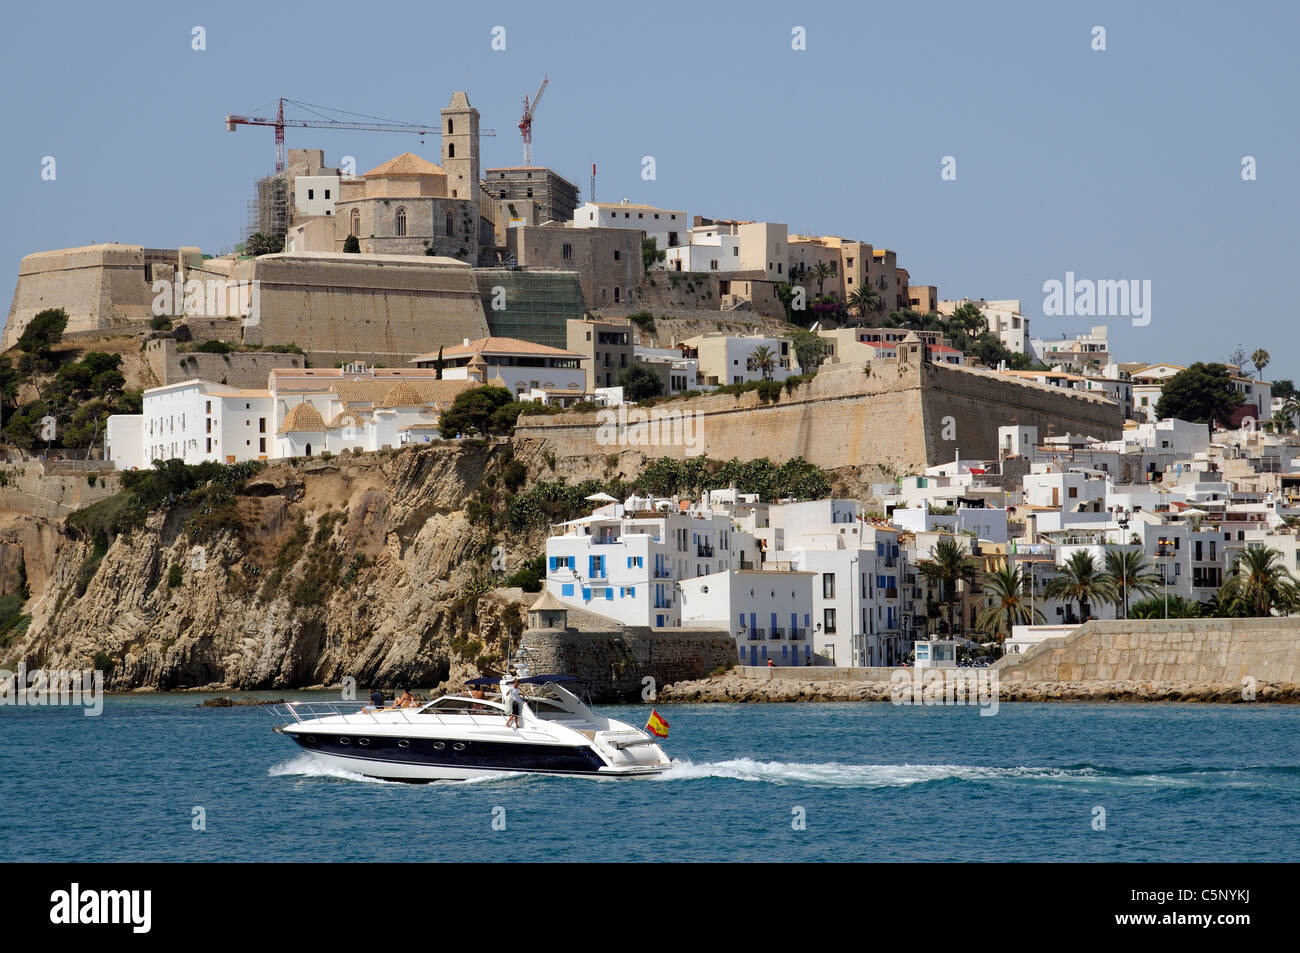 Eivissa Port on the Spanish island of  Ibiza overlooked by the old town & Cathedral seen from the Mediterranean Sea Stock Photo